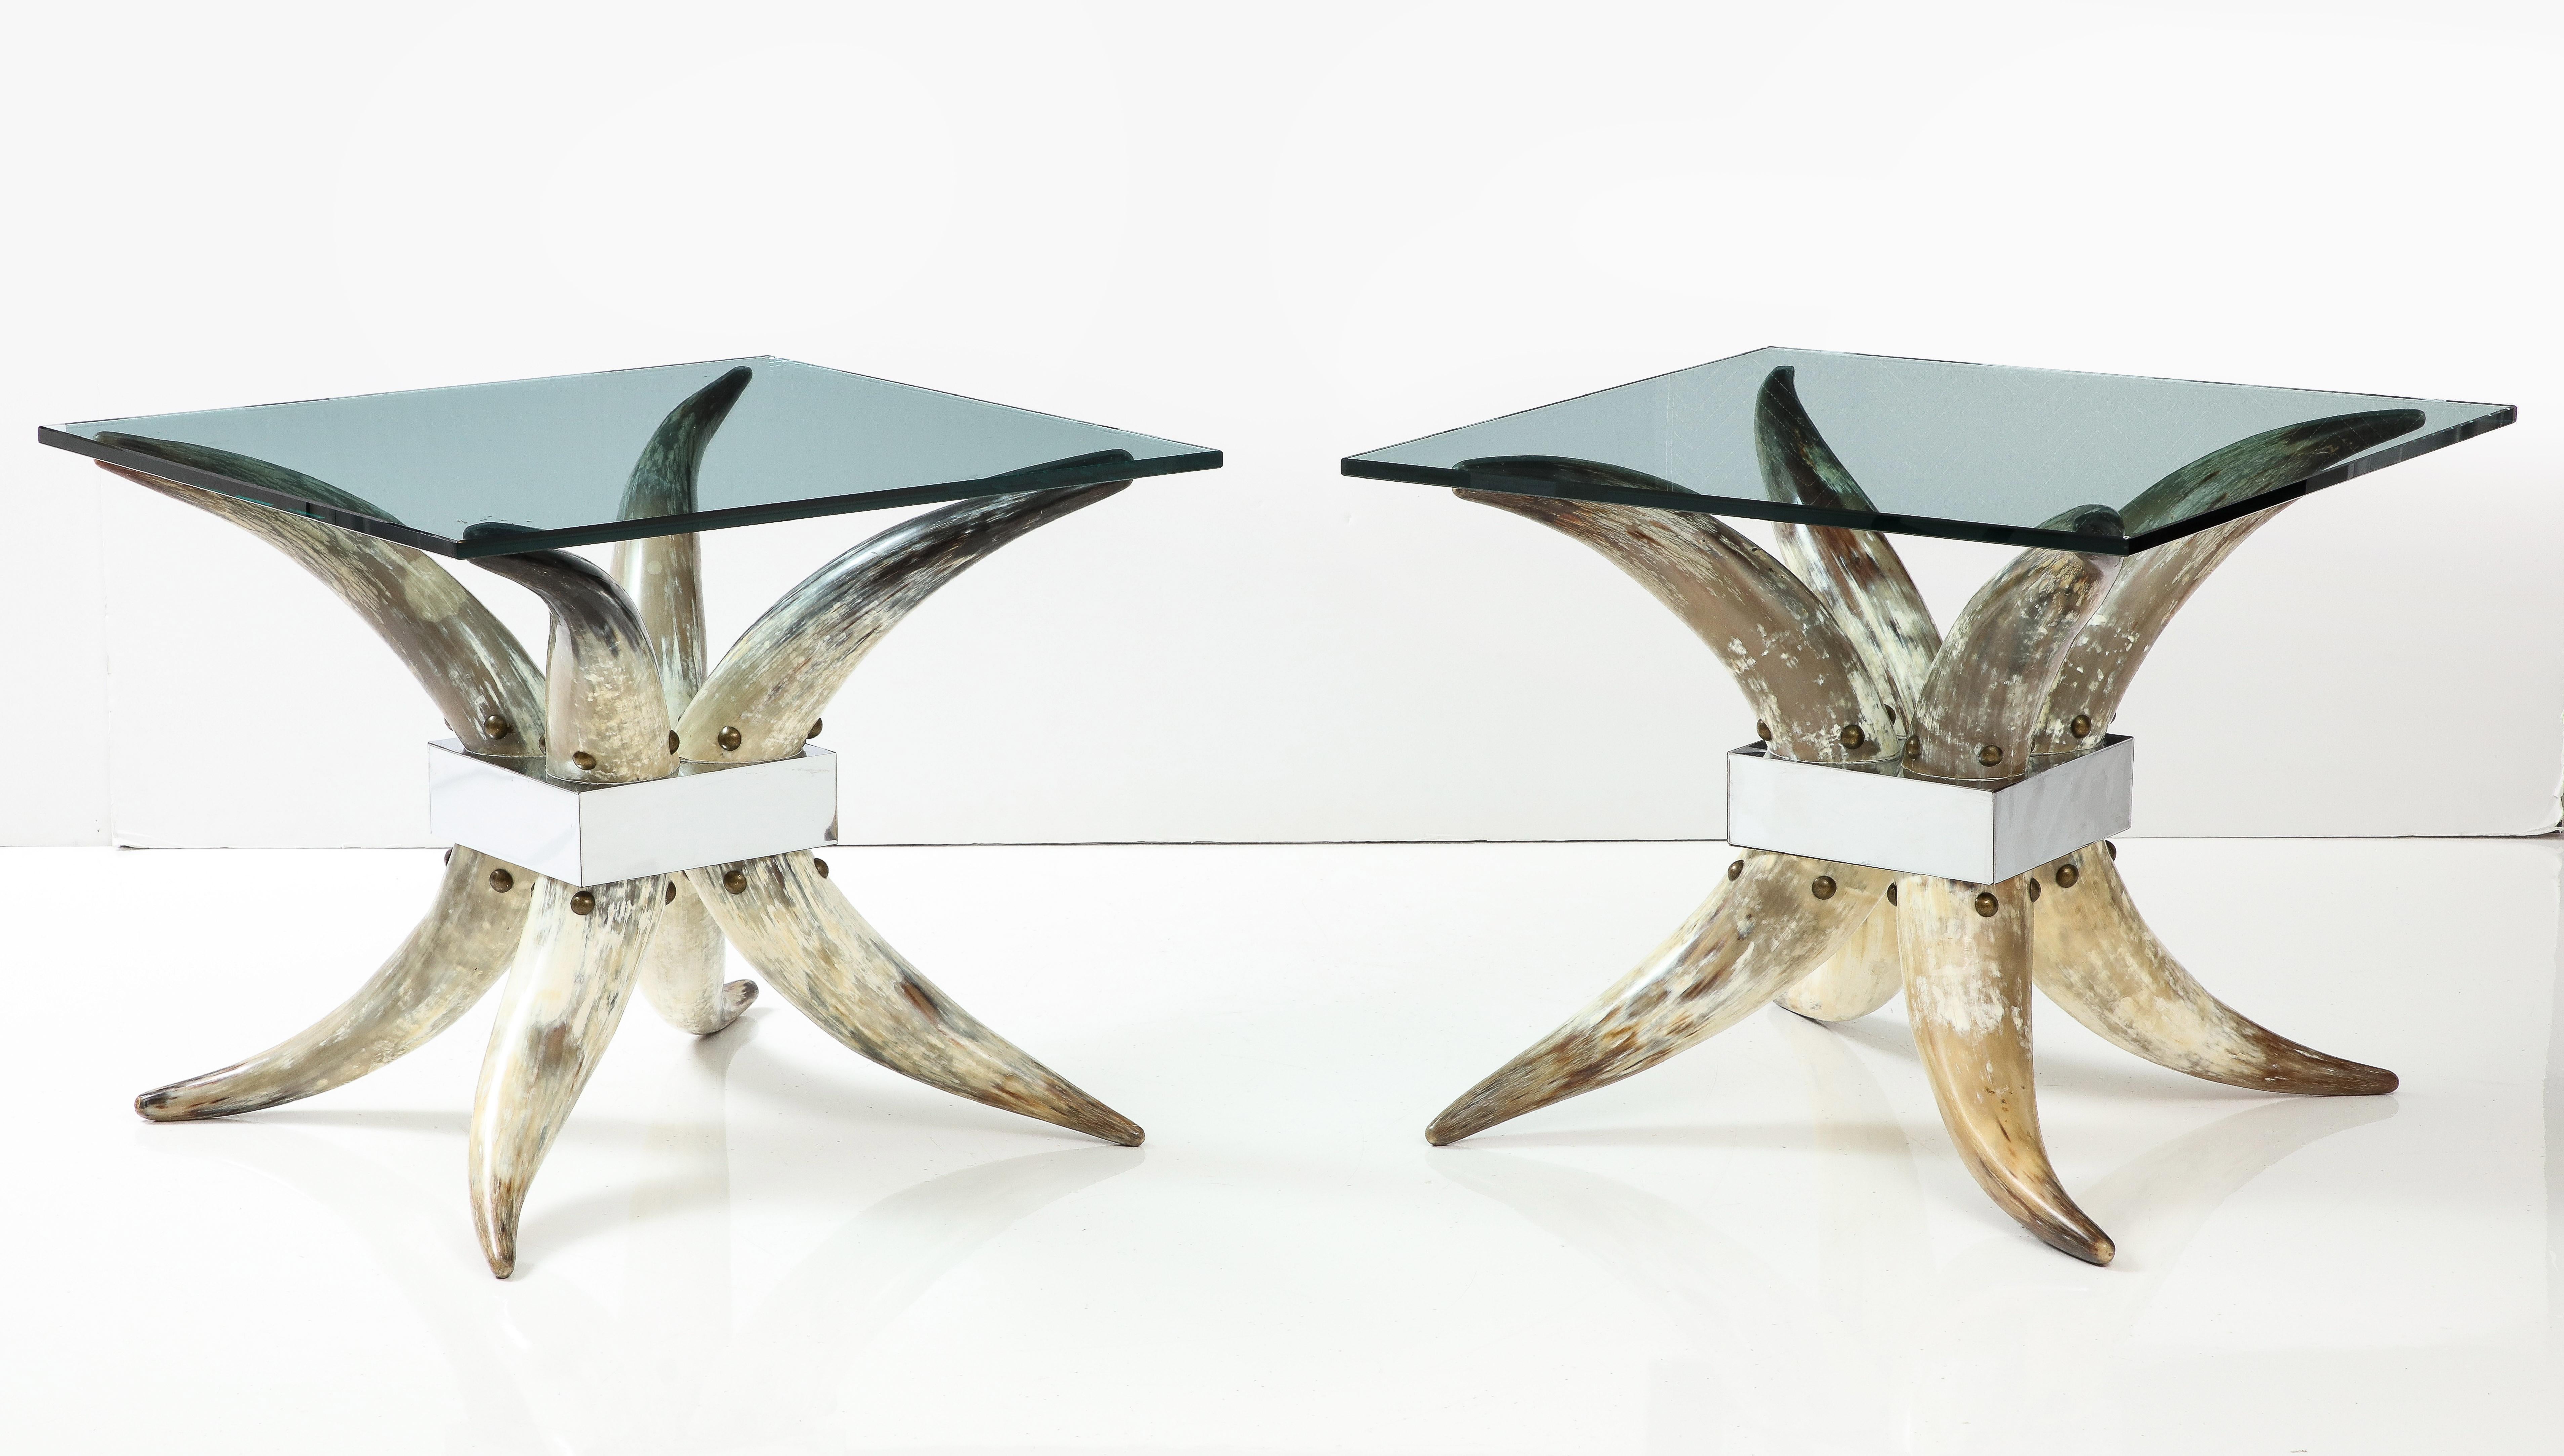 Wonderfull Pair of 1970's Steer Horn tables.
The tables have New 3/4 